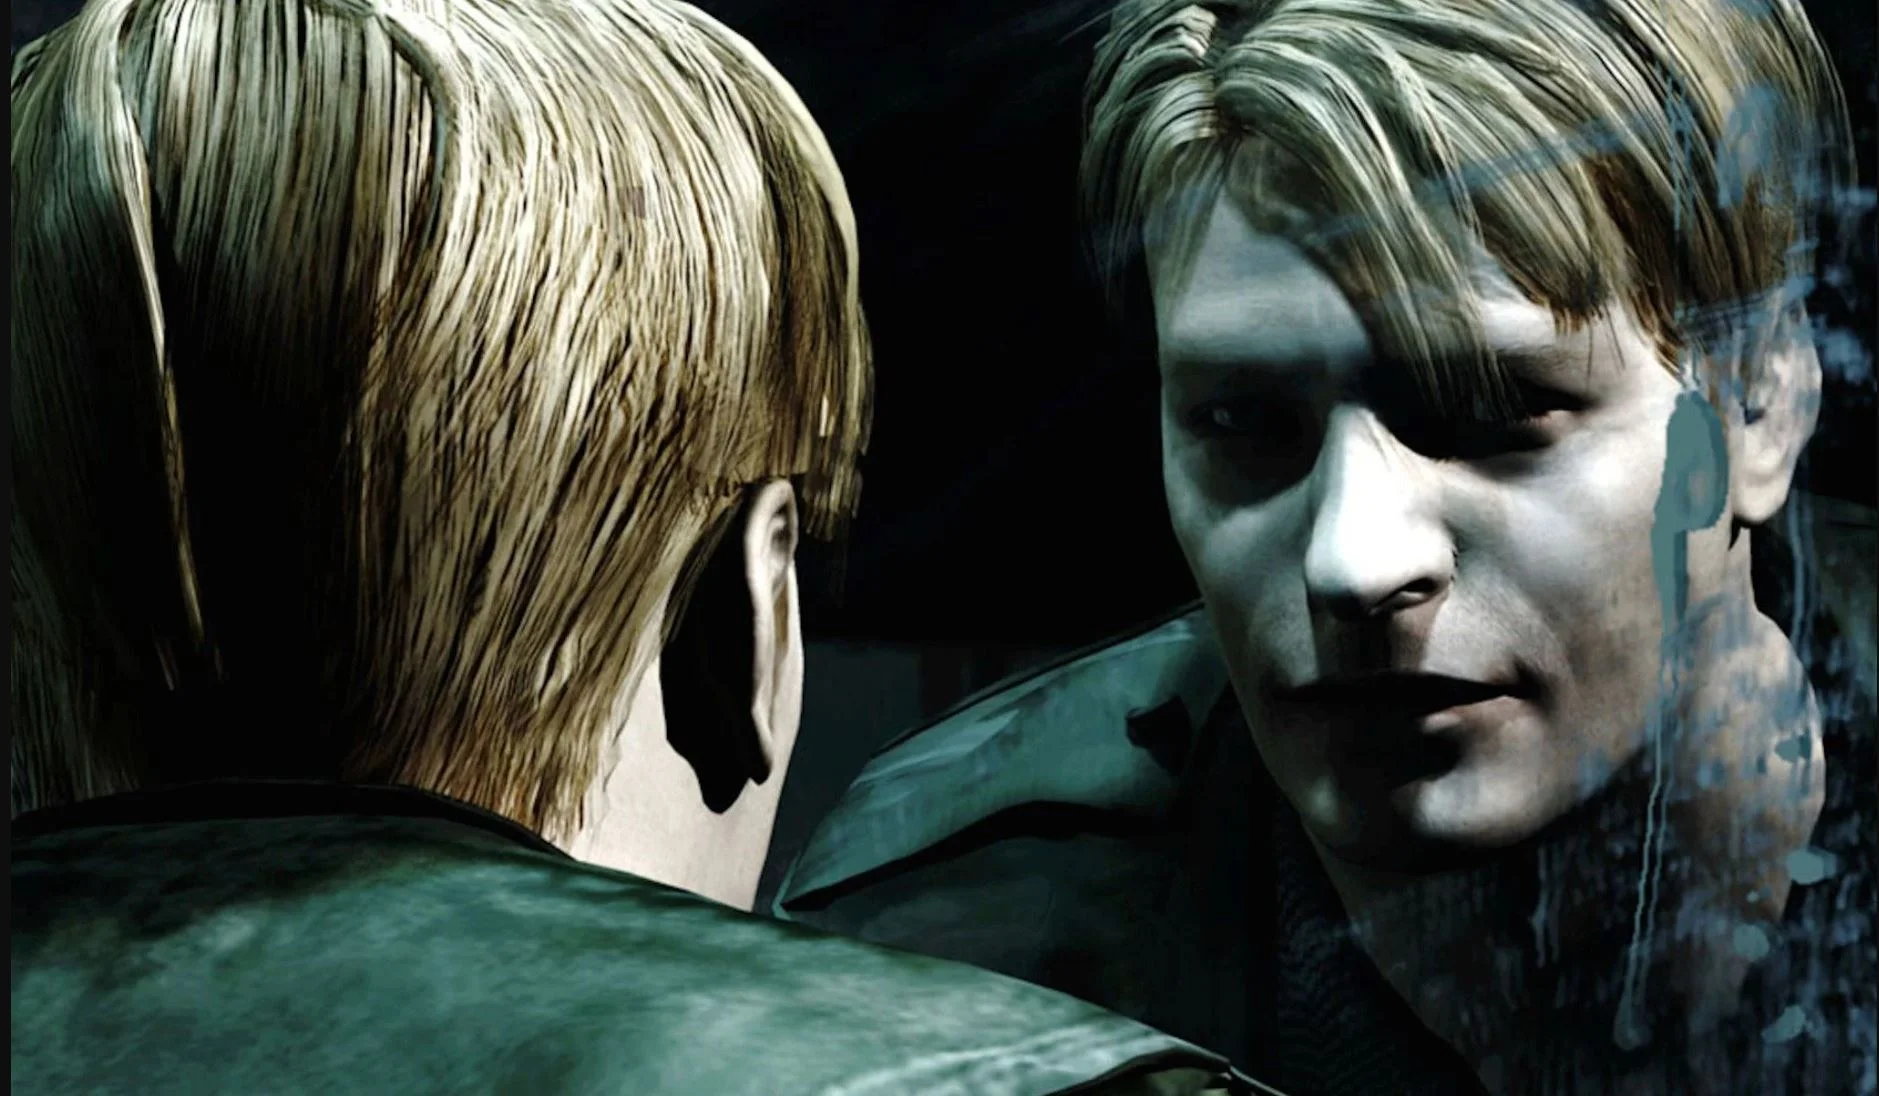 Exciting Peek at Silent Hill 2 Remake: Next Month's State of Play to Showcase New Gameplay